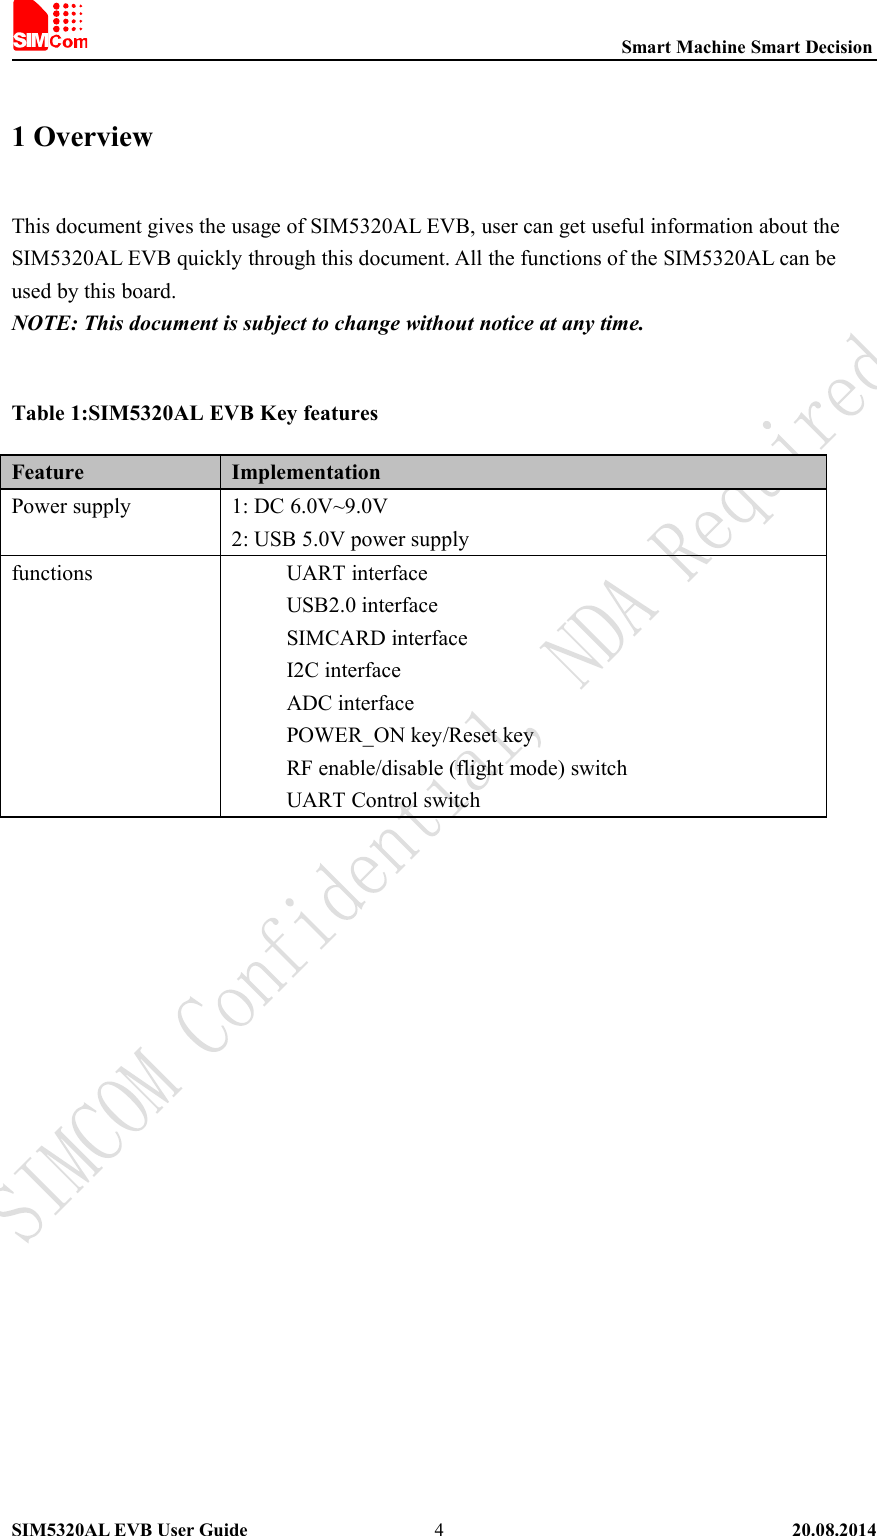 Smart Machine Smart DecisionSIM5320AL EVB User Guide 20.08.201441 OverviewThis document gives the usage of SIM5320AL EVB, user can get useful information about theSIM5320AL EVB quickly through this document. All the functions of the SIM5320AL can beused by this board.NOTE: This document is subject to change without notice at any time.Table 1:SIM5320AL EVB Key featuresFeature ImplementationPower supply 1: DC 6.0V~9.0V2: USB 5.0V power supplyfunctions UART interfaceUSB2.0 interfaceSIMCARD interfaceI2C interfaceADC interfacePOWER_ON key/Reset keyRF enable/disable (flight mode) switchUART Control switch